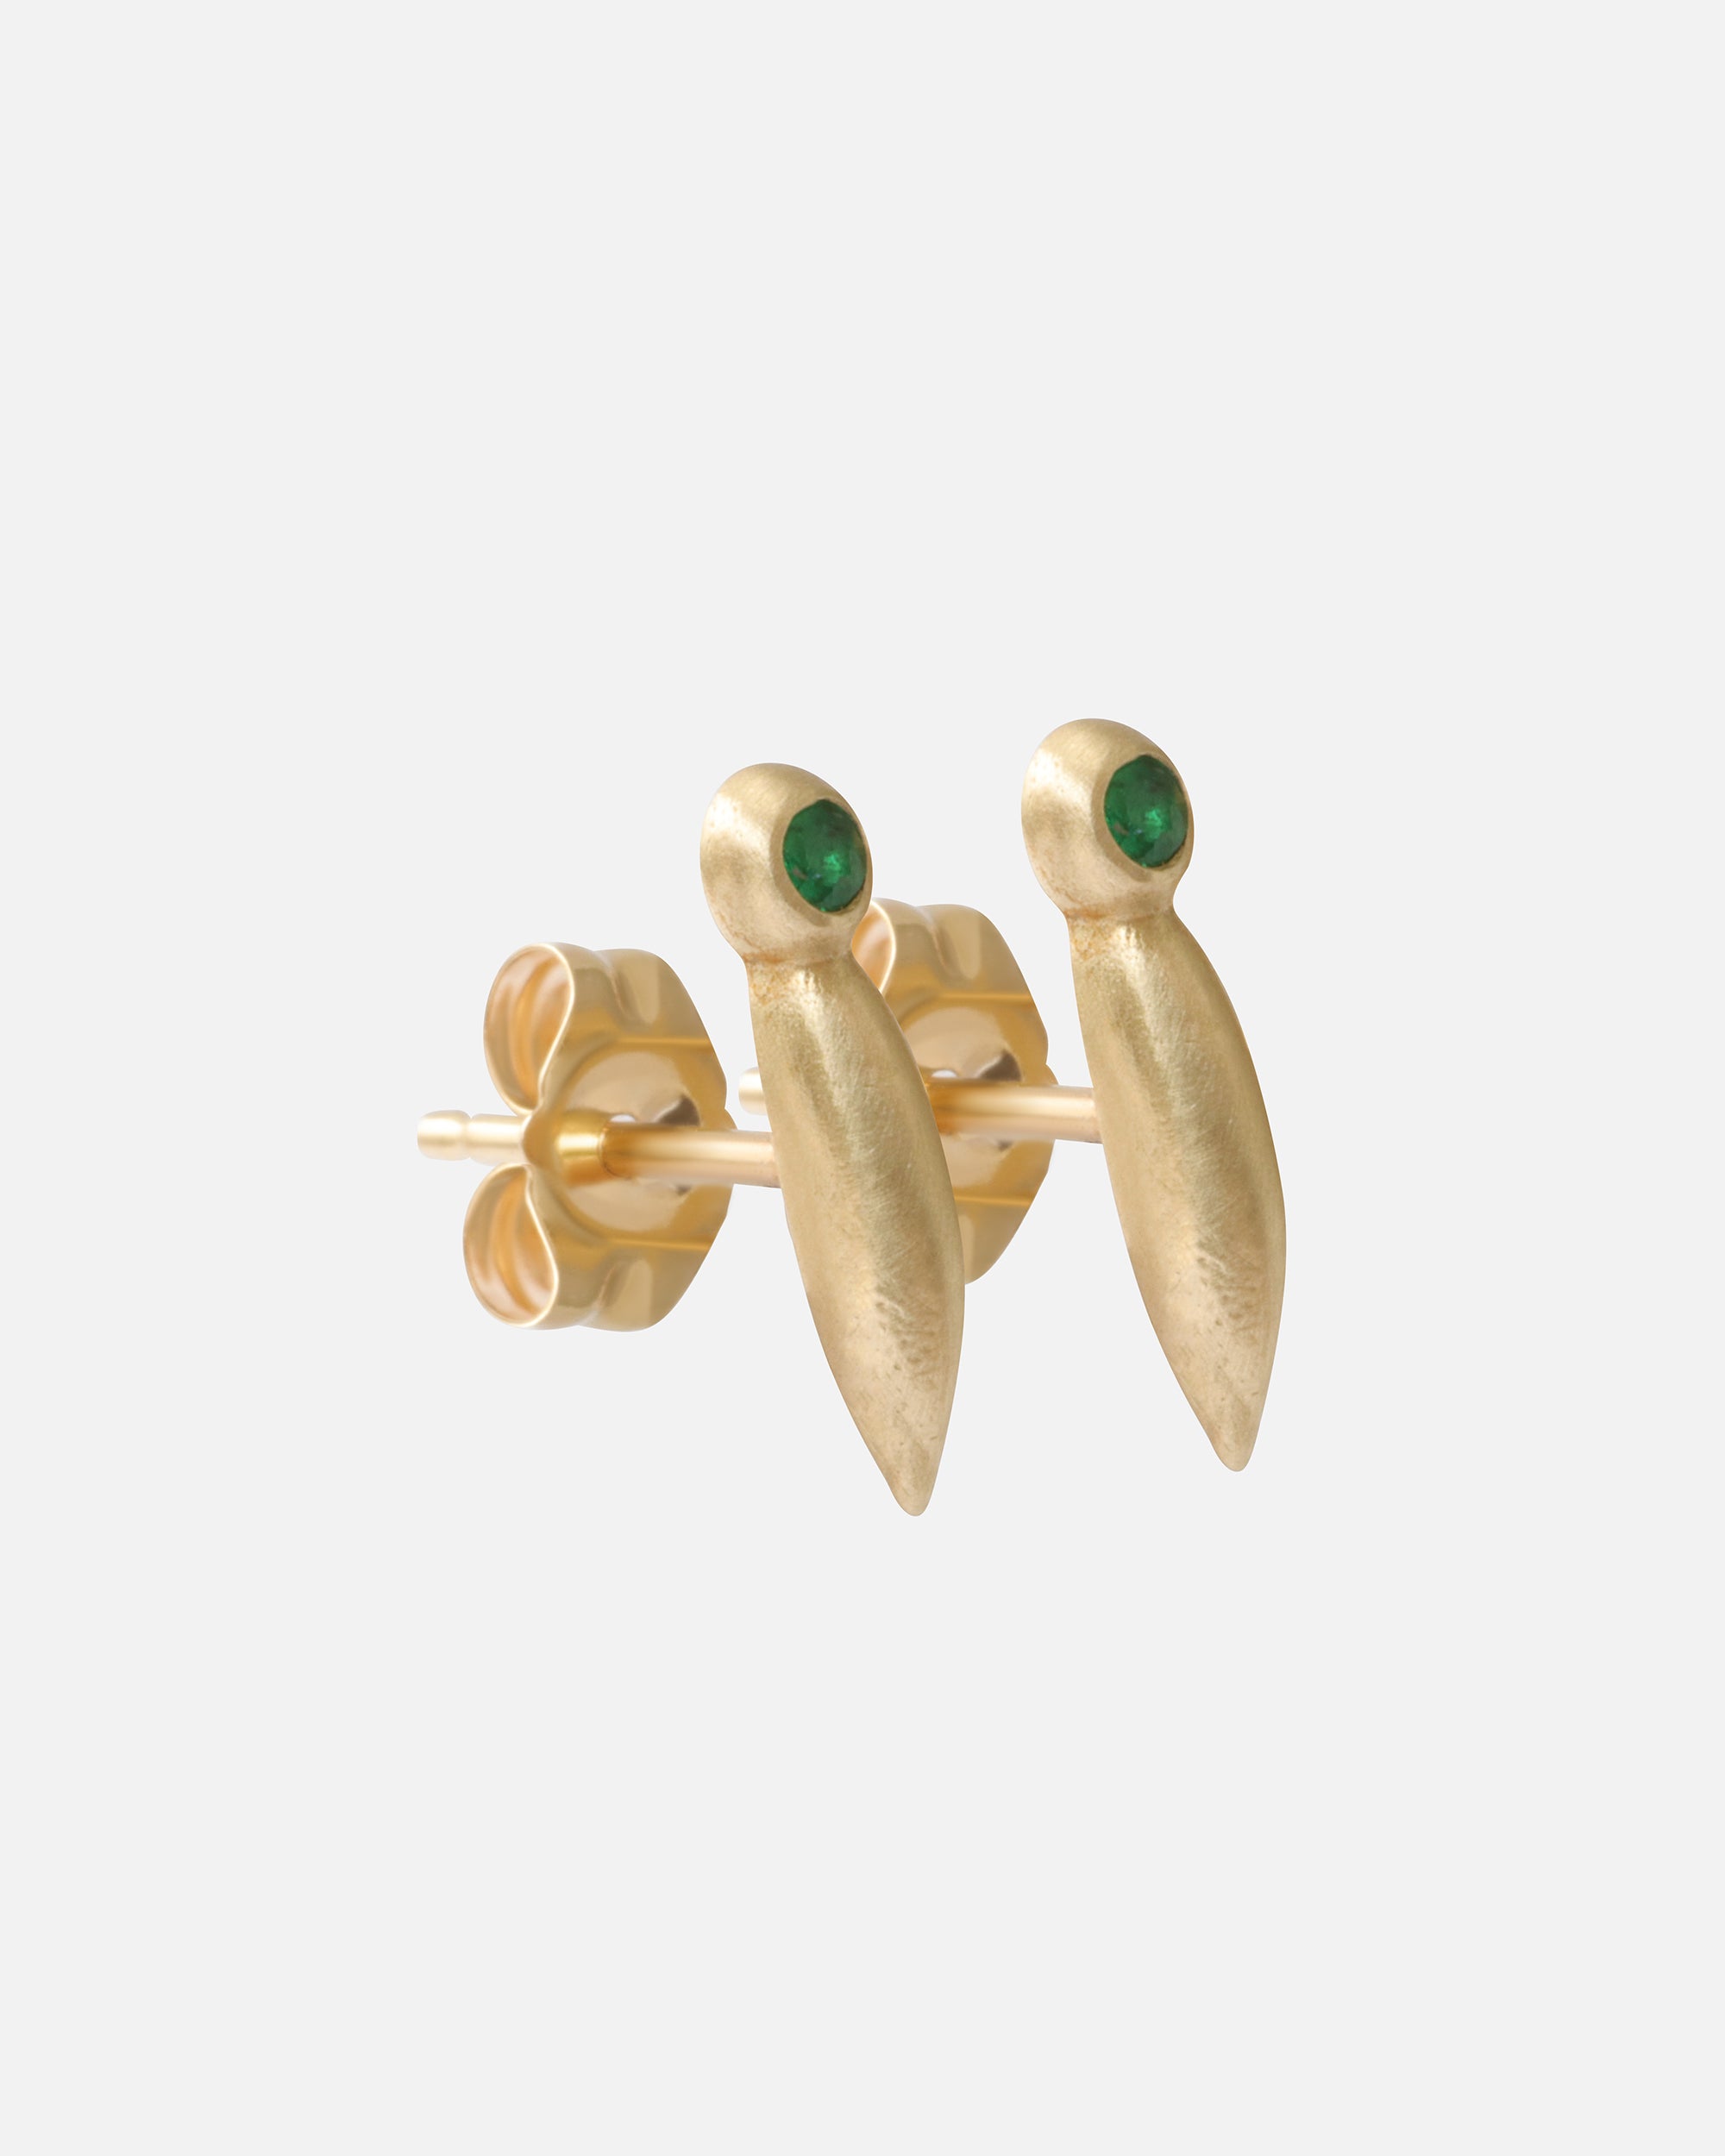 Emerald Bug / Studs By Tricia Kirkland in earrings Category